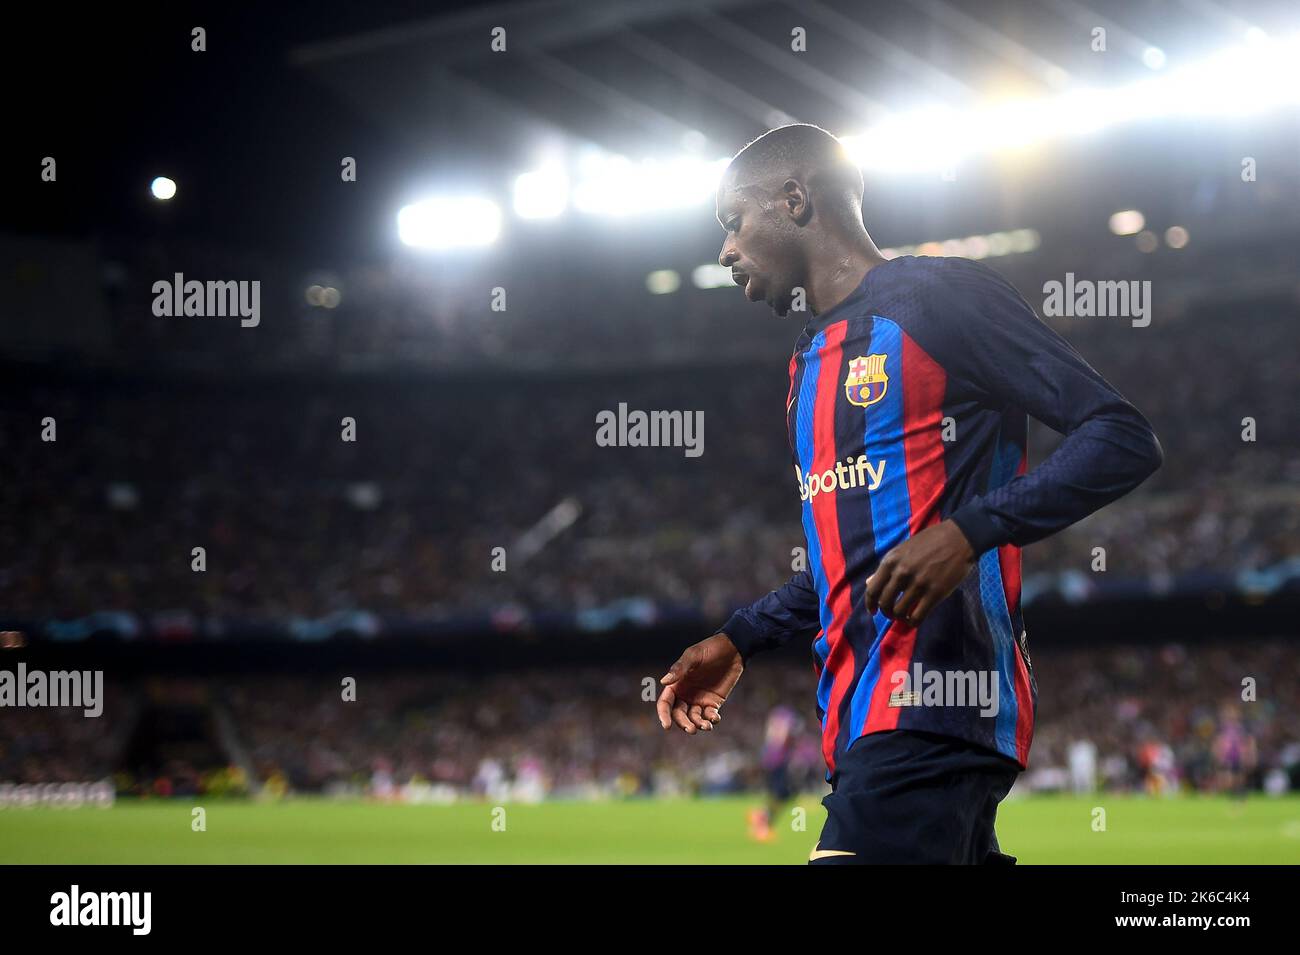 Barcelona, Spain. 12 October 2022. Ousmane Dembele of FC Barcelona looks on during the UEFA Champions League football match between FC Barcelona and FC Internazionale. Credit: Nicolò Campo/Alamy Live News Stock Photo